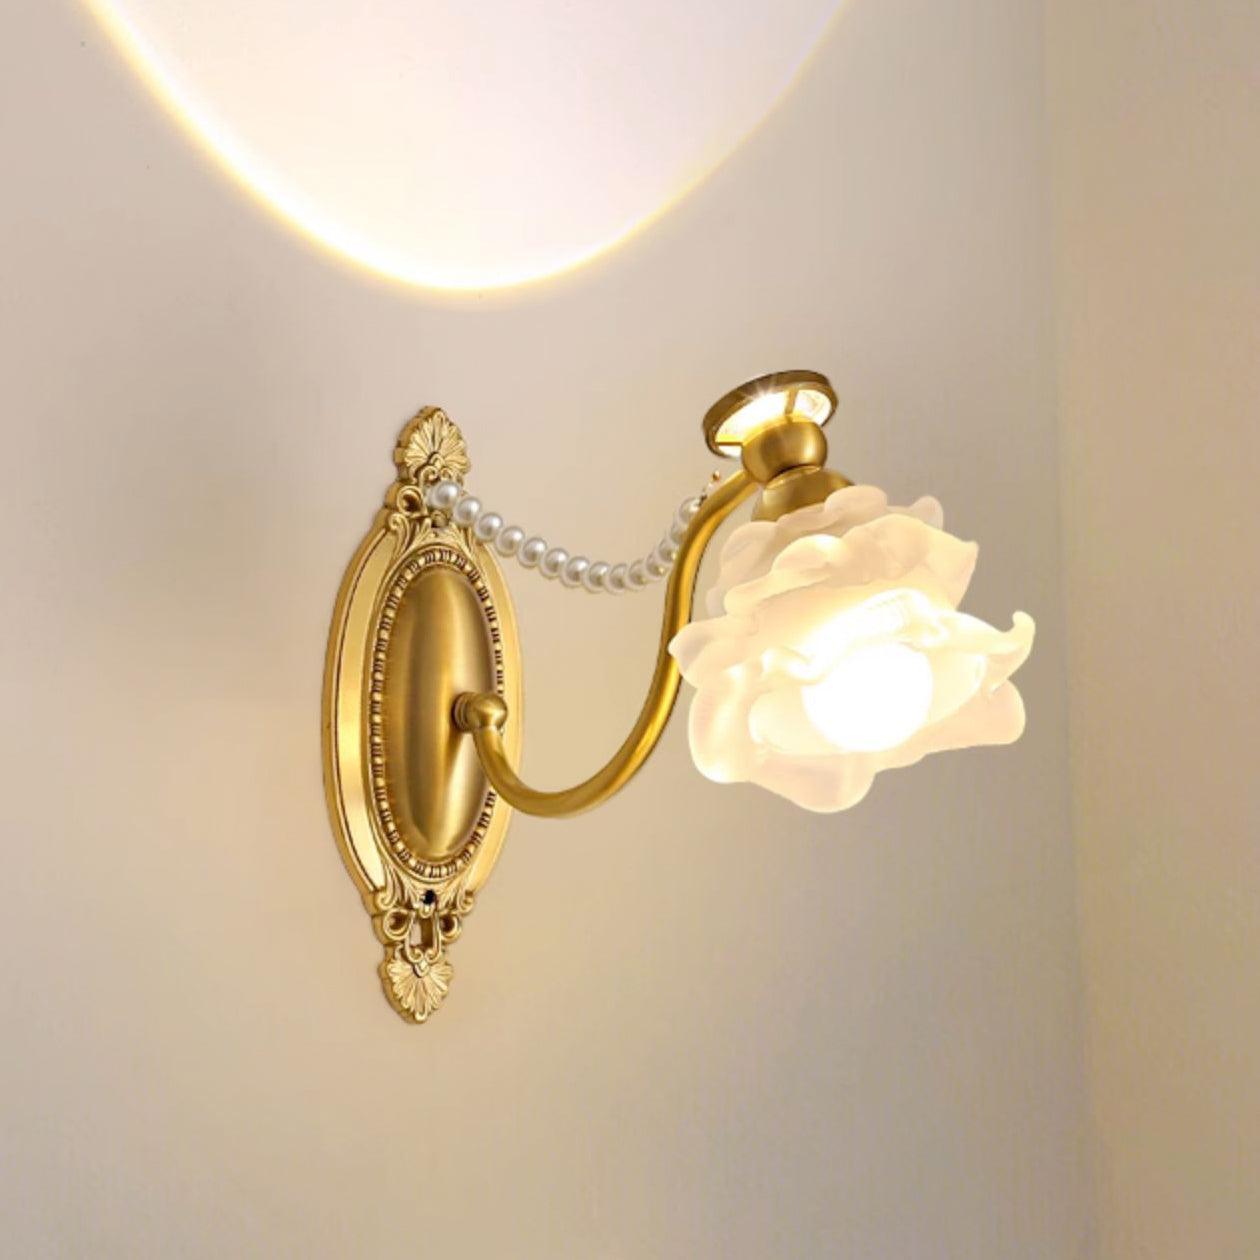 Brass Floral Wall Lamp 11.4″- 10.6″